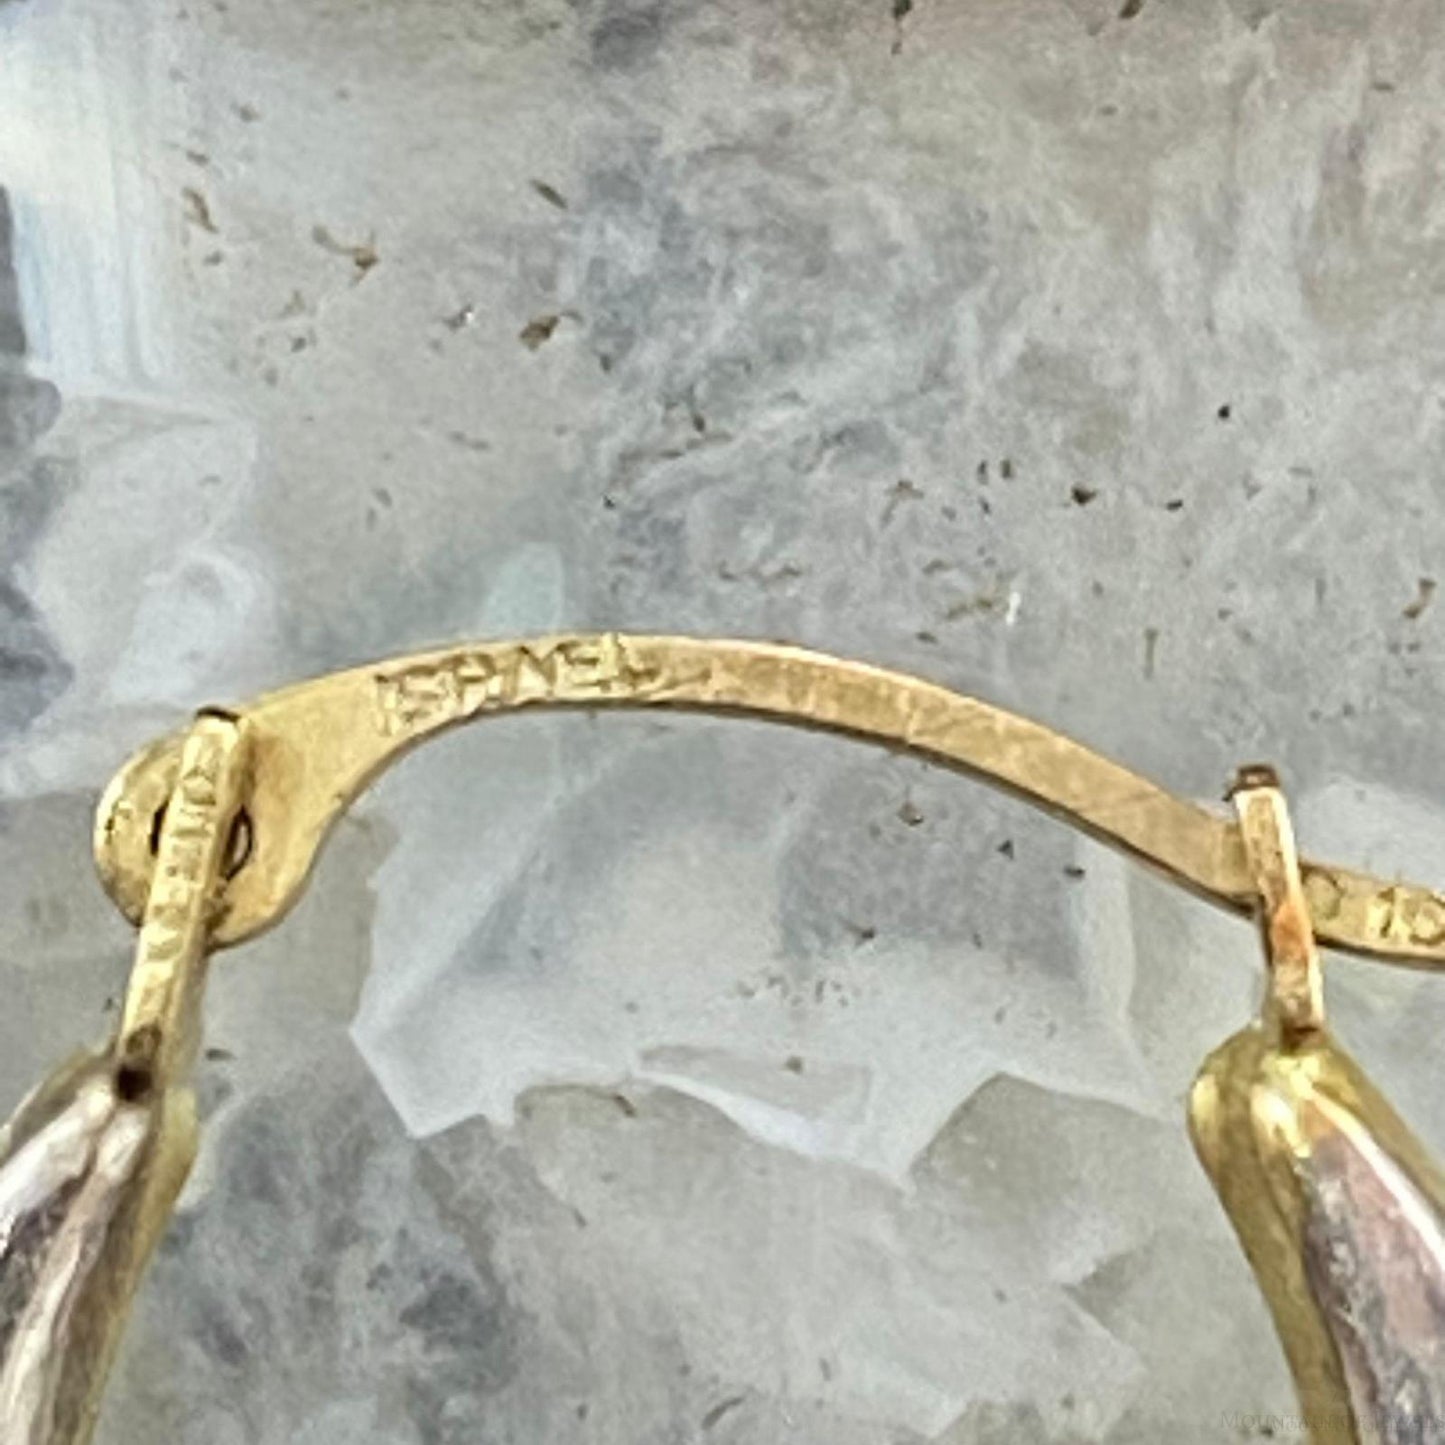 10K Two Tone Gold Floral Engraved Hoop Earrings For Women